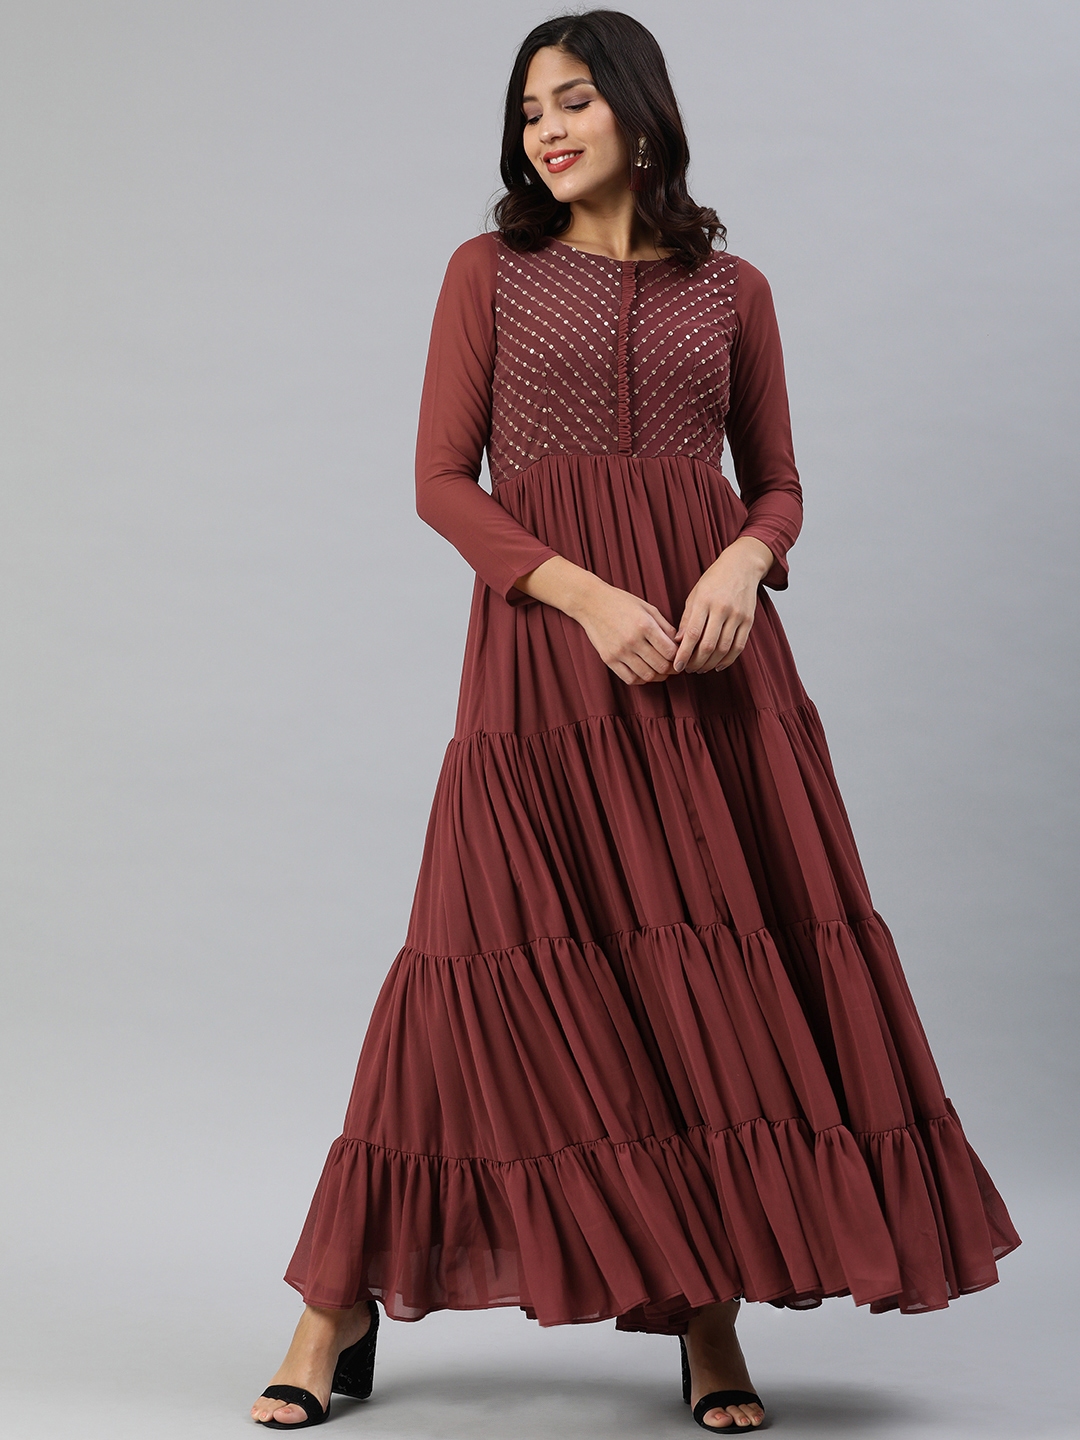 Maroon Indian Gown Buy Maroon Color Gown Online at Best Price